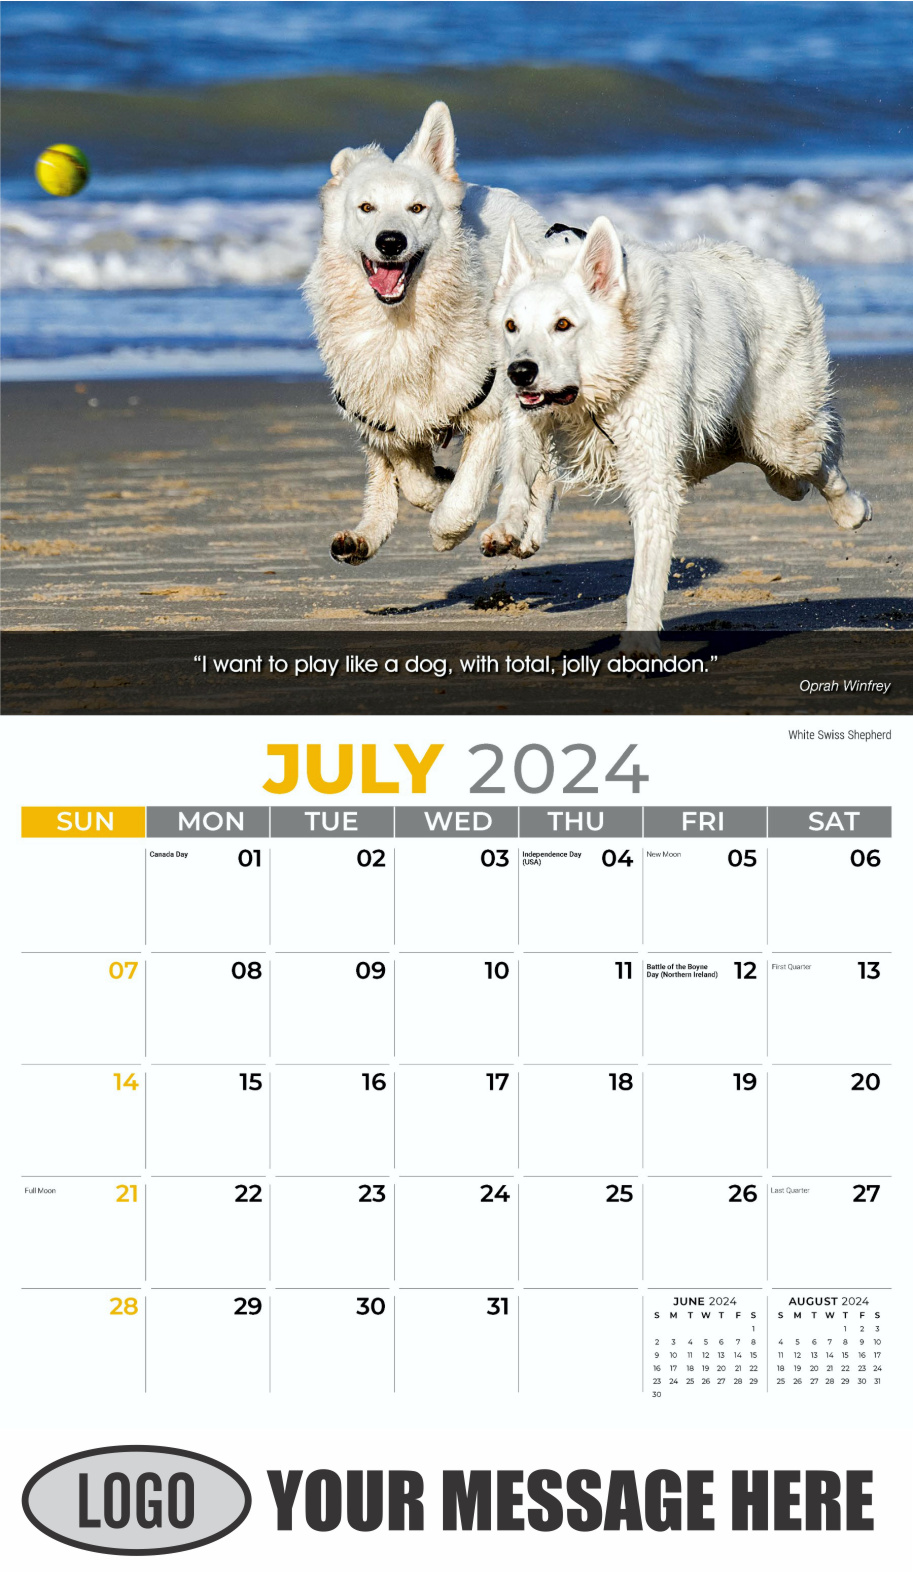 Dogs 2024 Vets and Pets Business Promotion Calendar - July